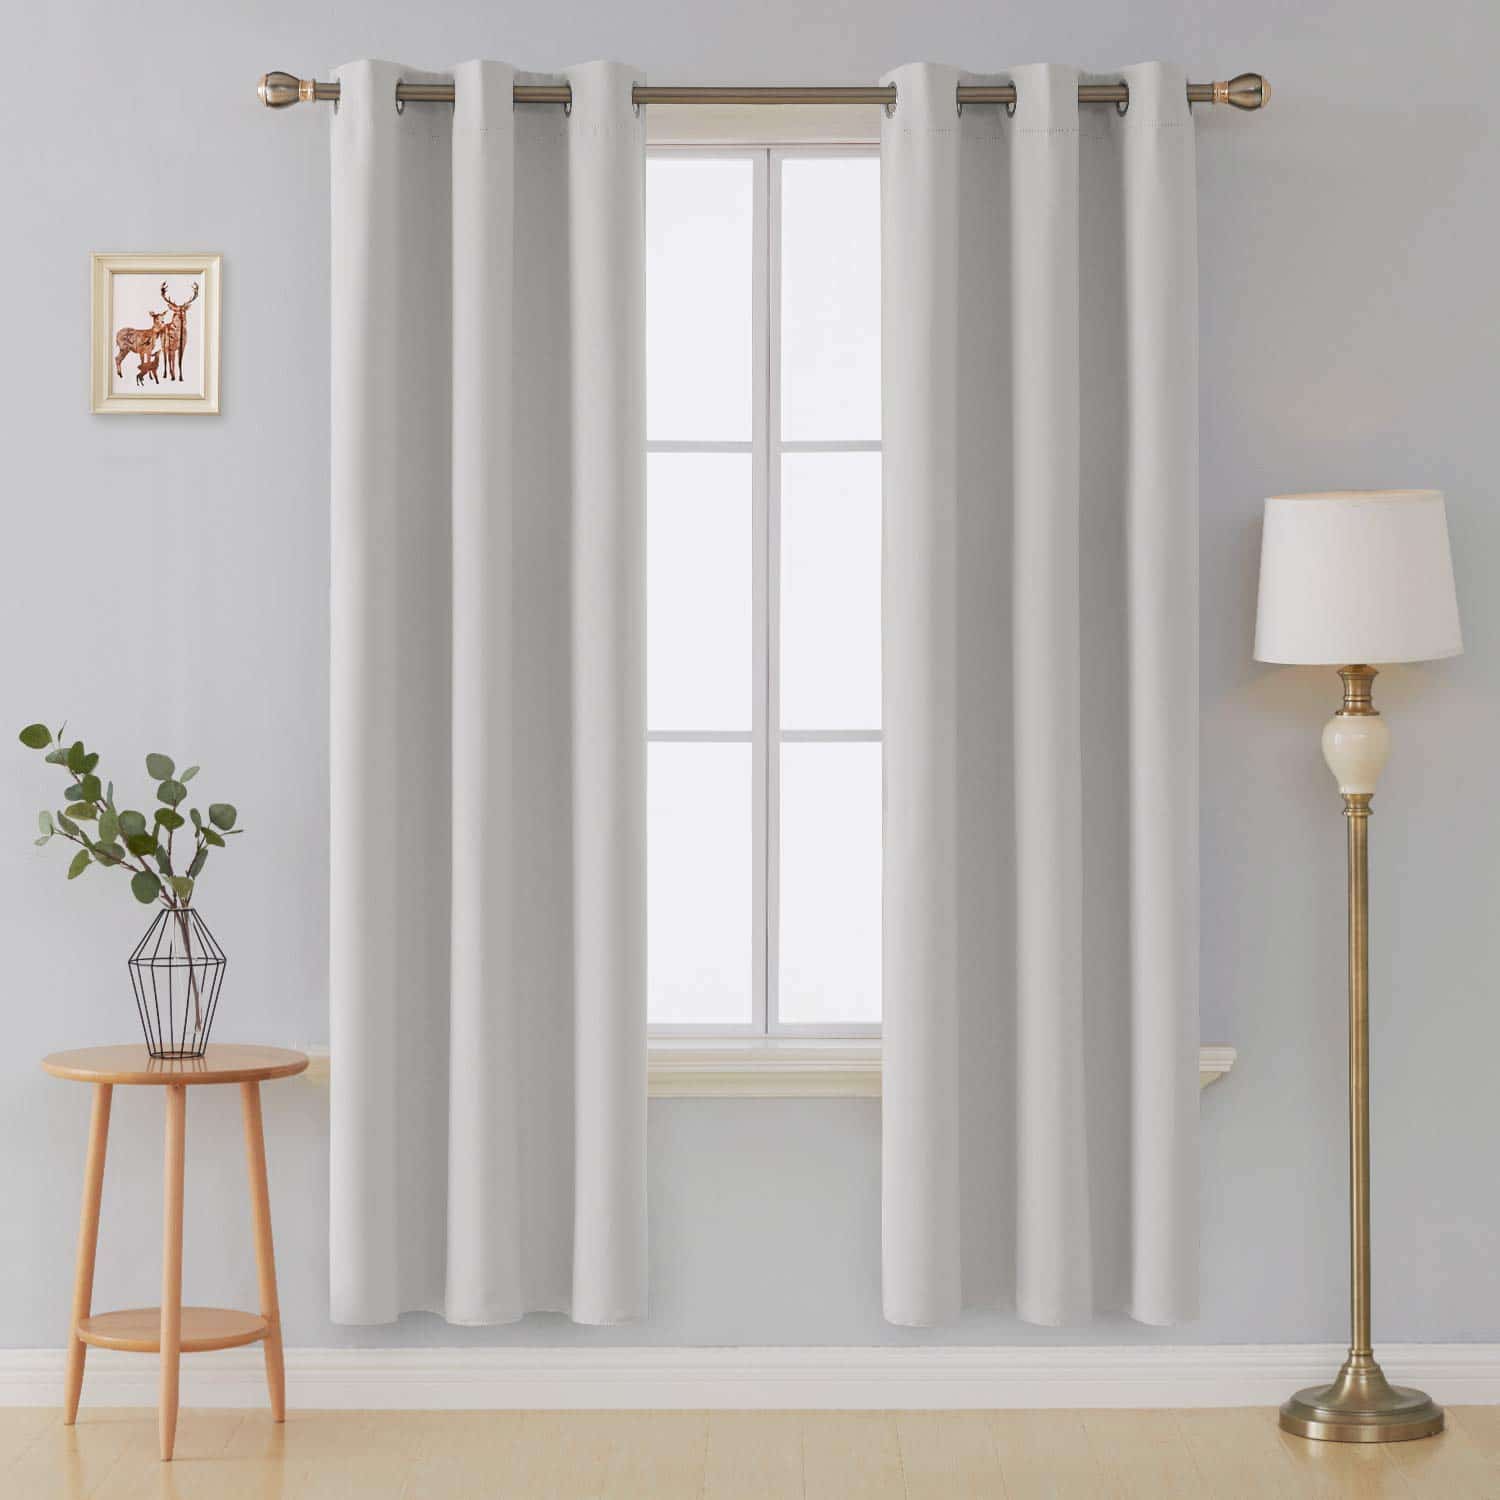 Top 10 Best White Blackout Curtains in 2022 Reviews